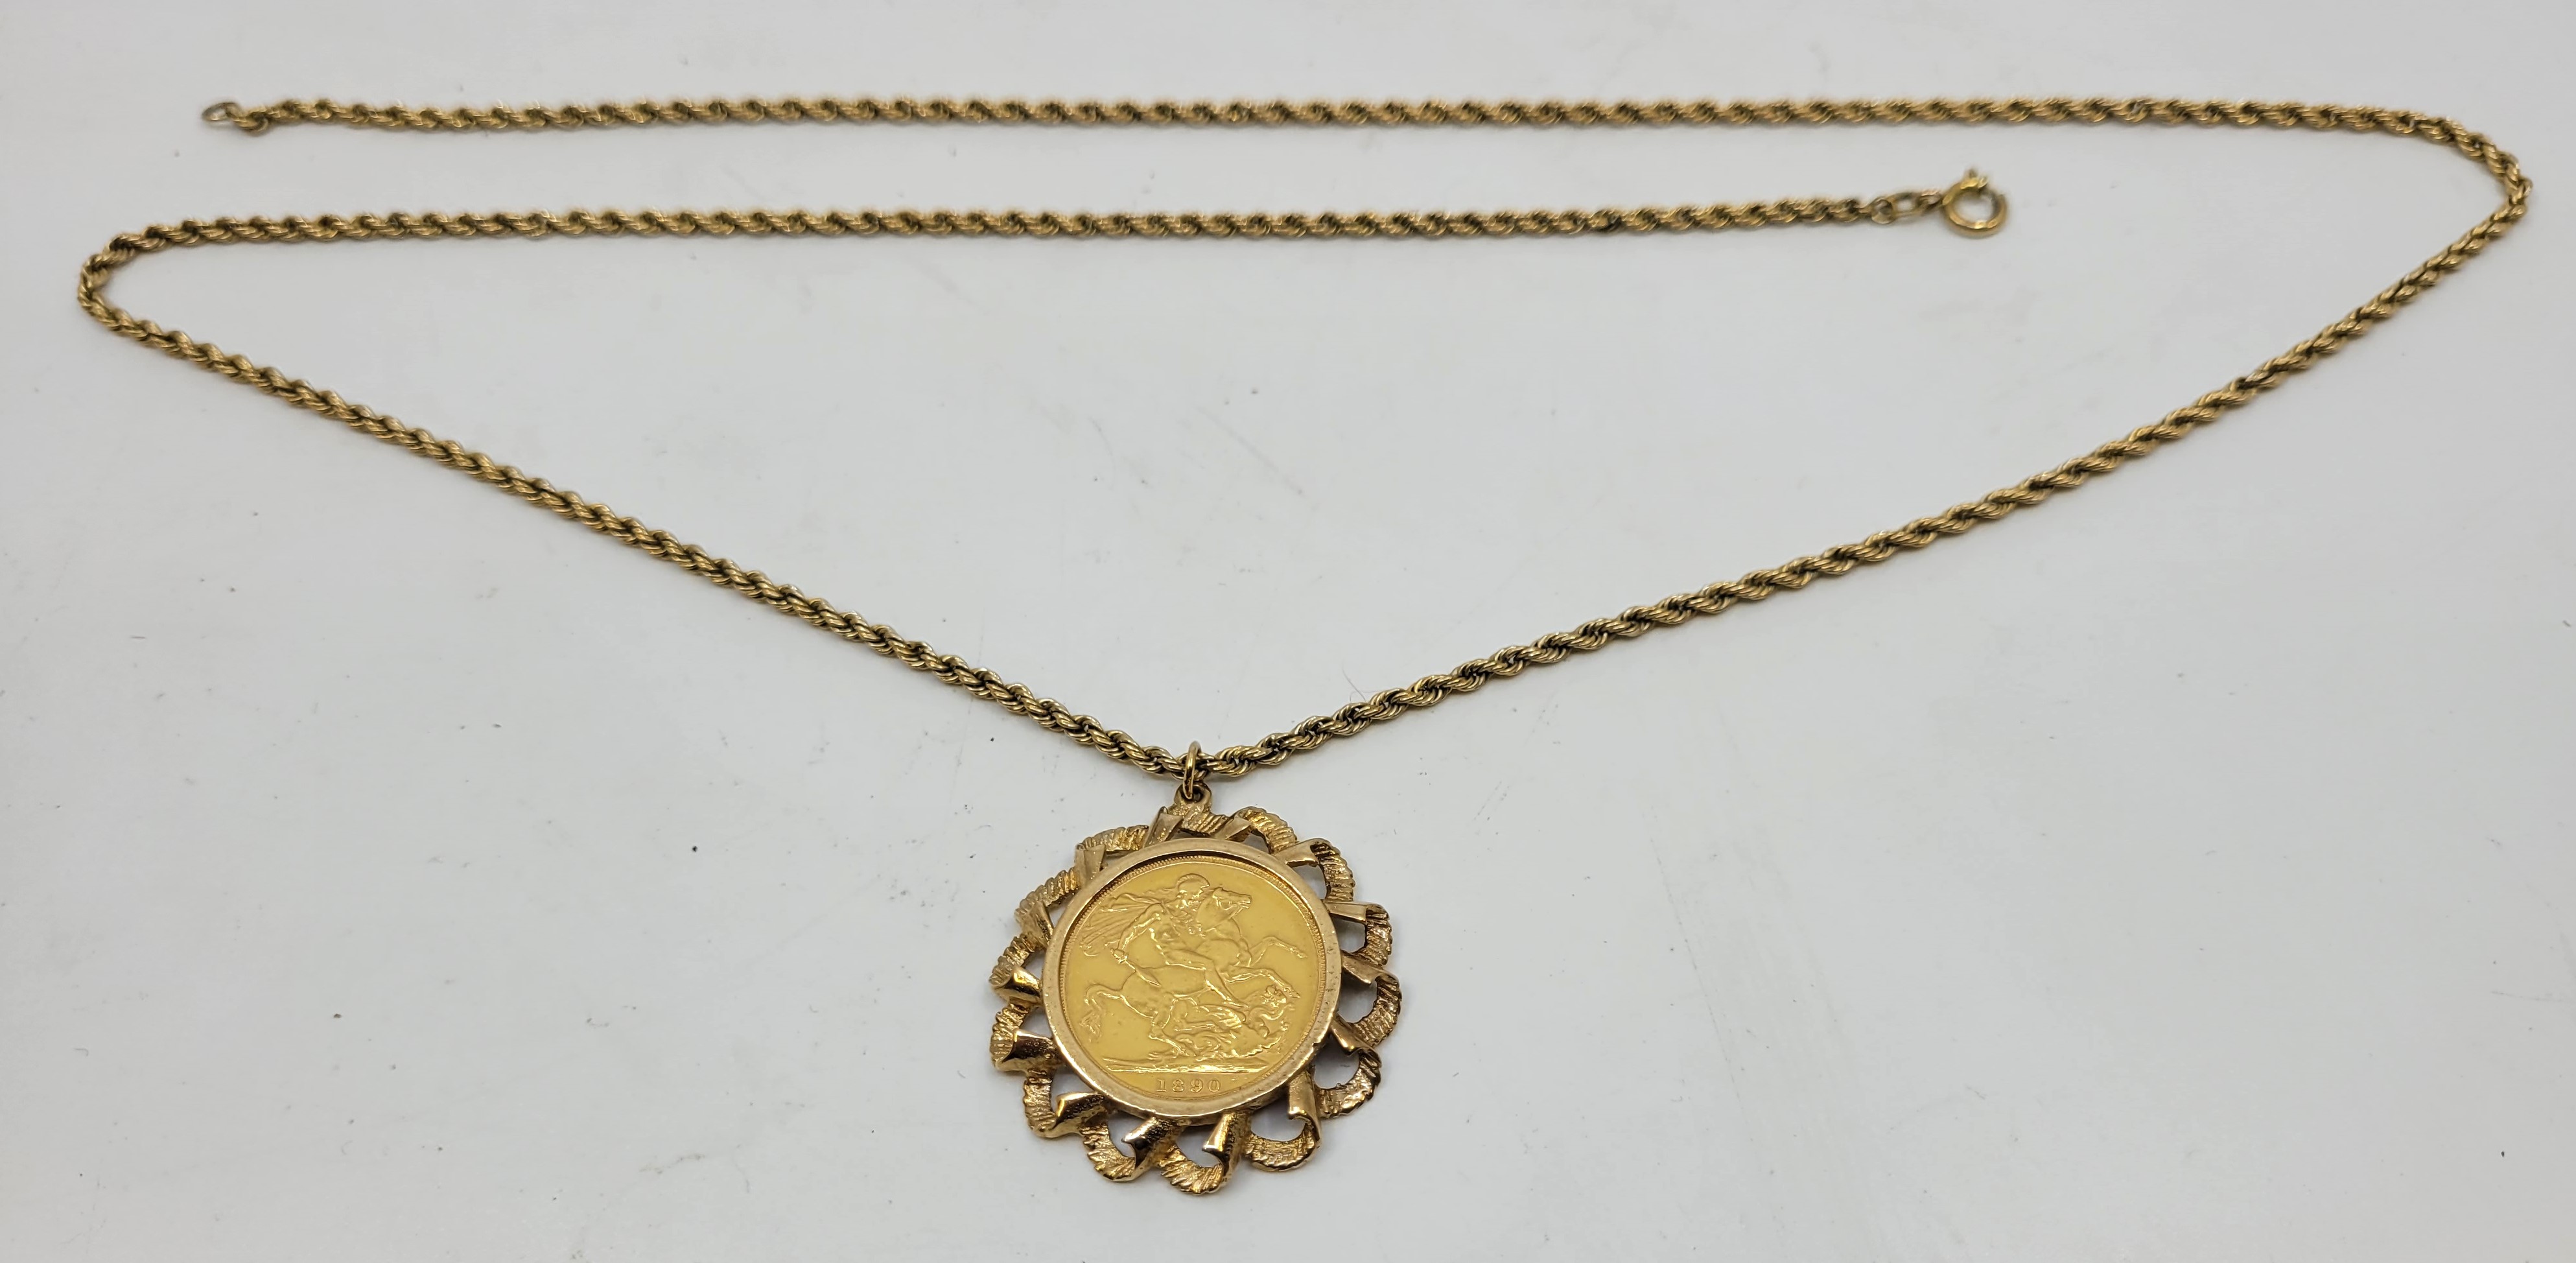 A Victoria 1890 "jubilee bust" gold sovereign coin, London mint, in 9ct. gold pendant mount,